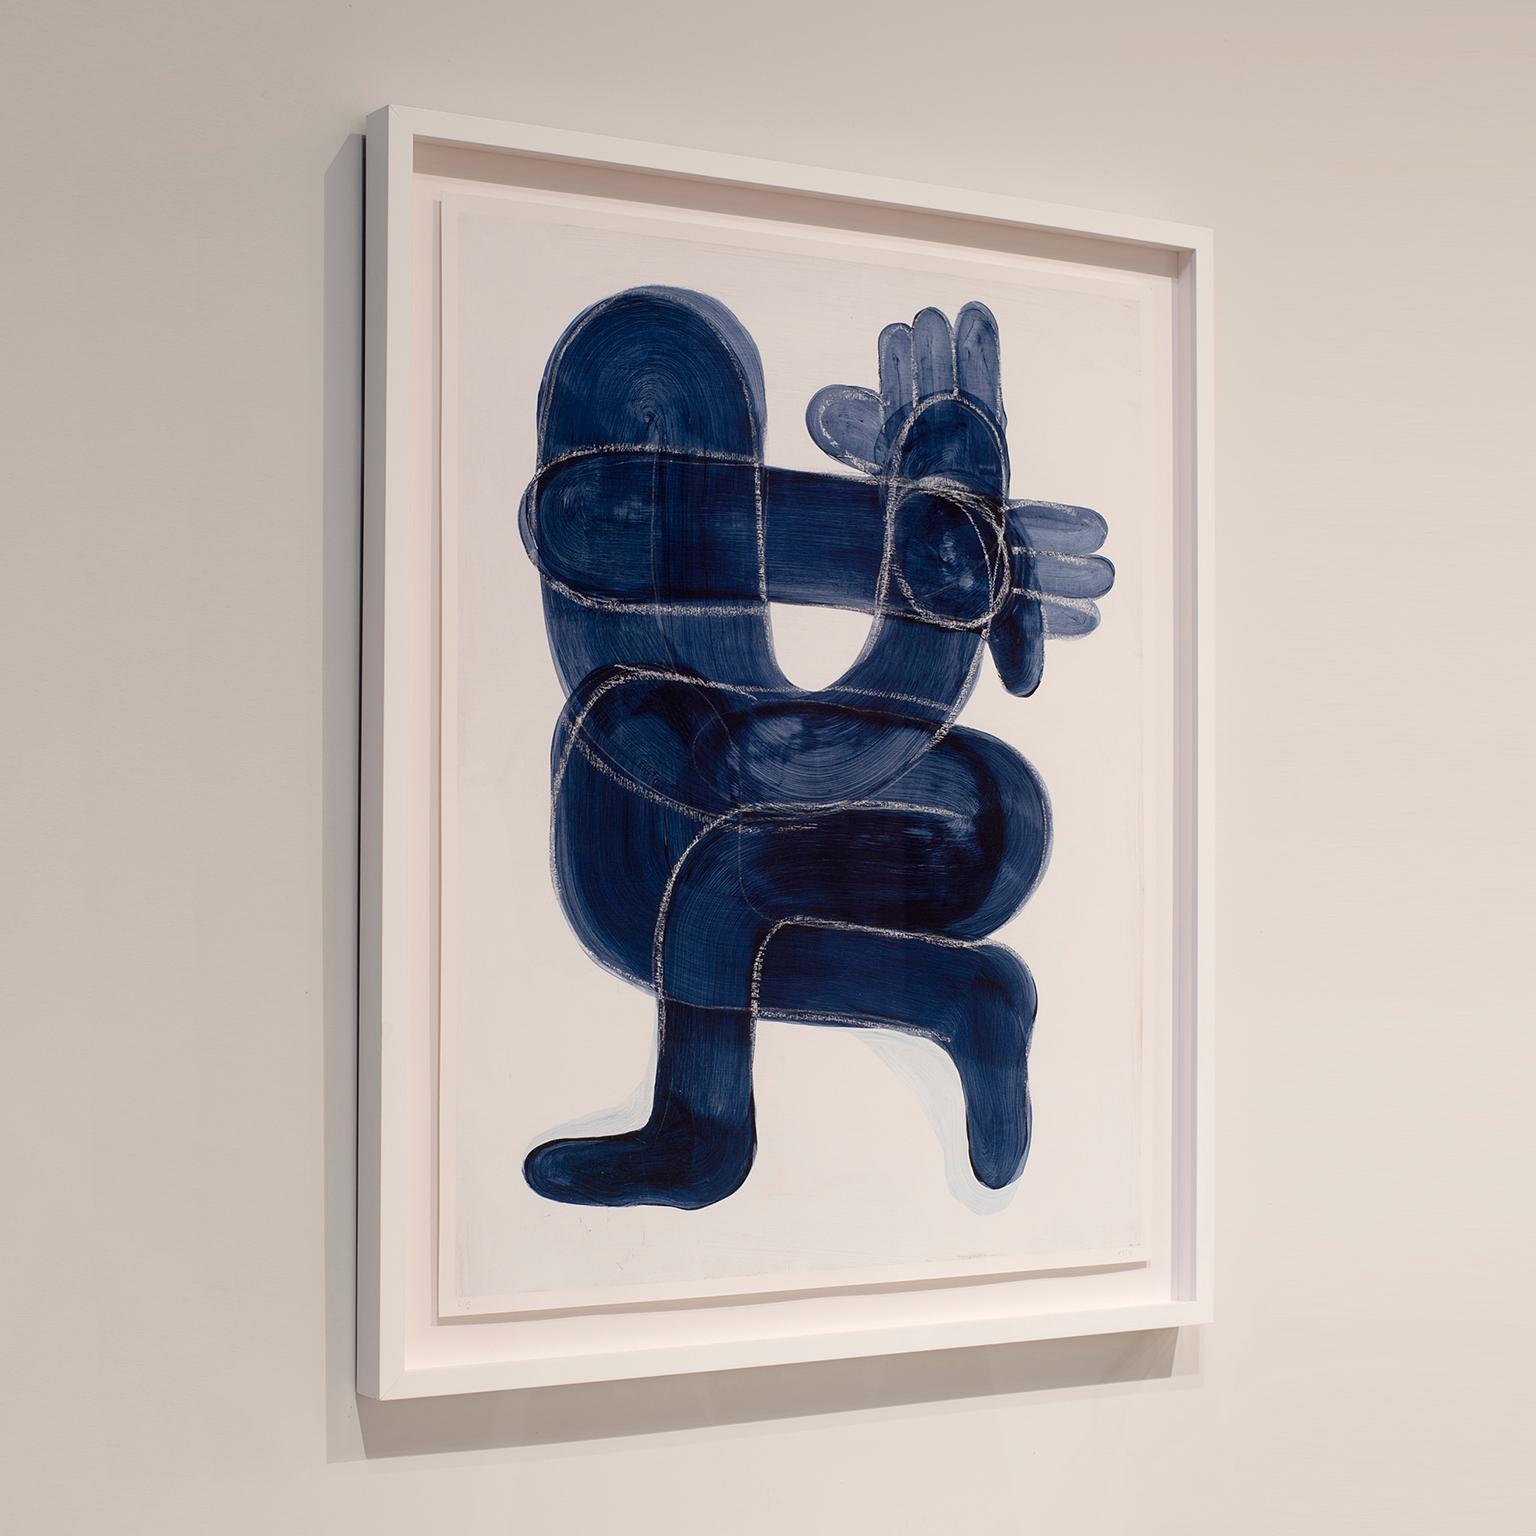 The feeling you get when you can't put your finger on something. Blue figurative - Abstract Print by Kyle Andrew Steed